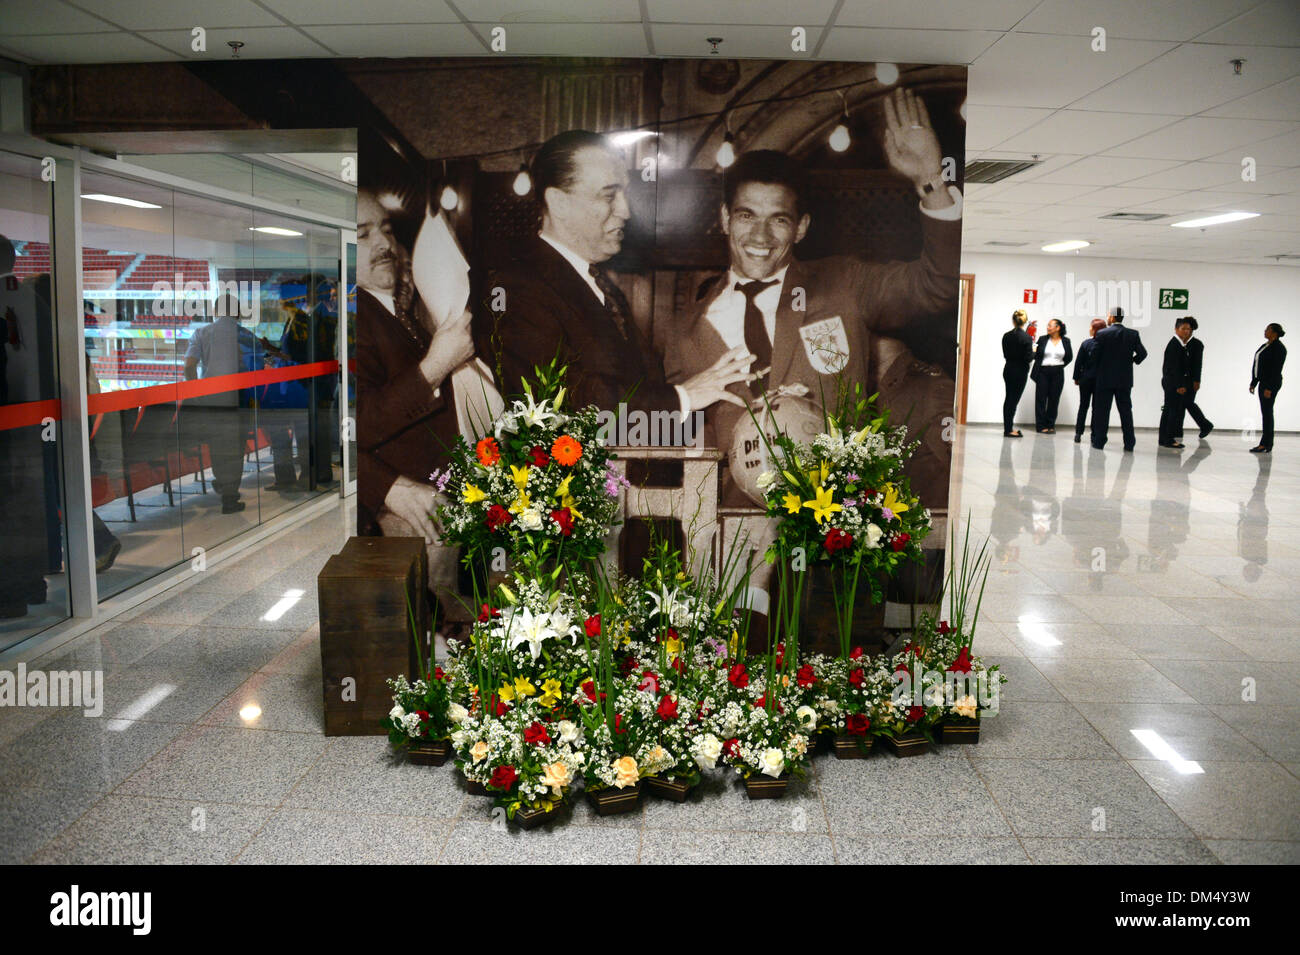 Brasilia, Brazil. 9th Dec, 2013. Flowers lie in front of a large photograph of late Brazilian national soccer player and two-times world champion Mane Garrincha (R) in the lobby area of the 'Stadion Nacional Mane Garrincha' stadium in Brasilia, Brazil, 9 December 2013. The Stadion Nacional Mane Garrincha is one of the venues which will host the matches for the 2014 Soccer World Cup in Brazil. Photo: Marcus Brandt/dpa/Alamy Live News Stock Photo